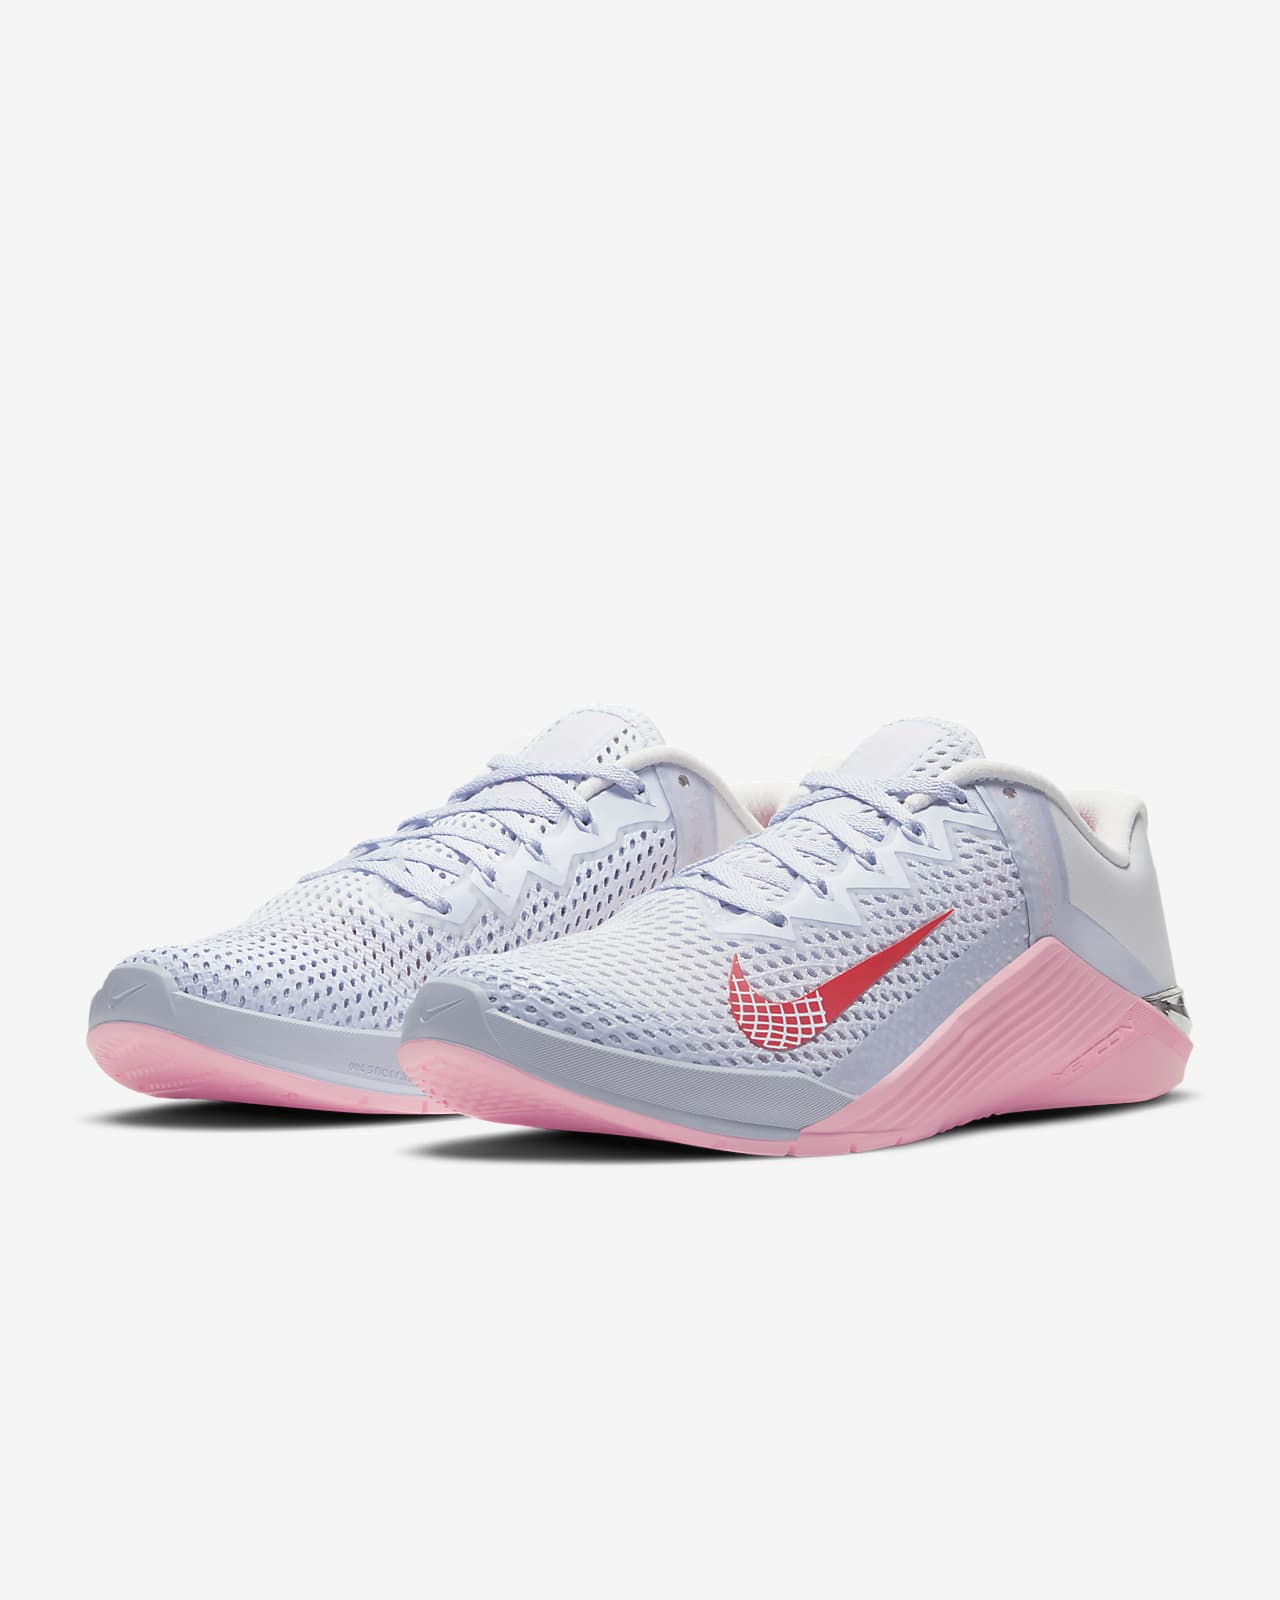 nike training metcon trainers in white and red